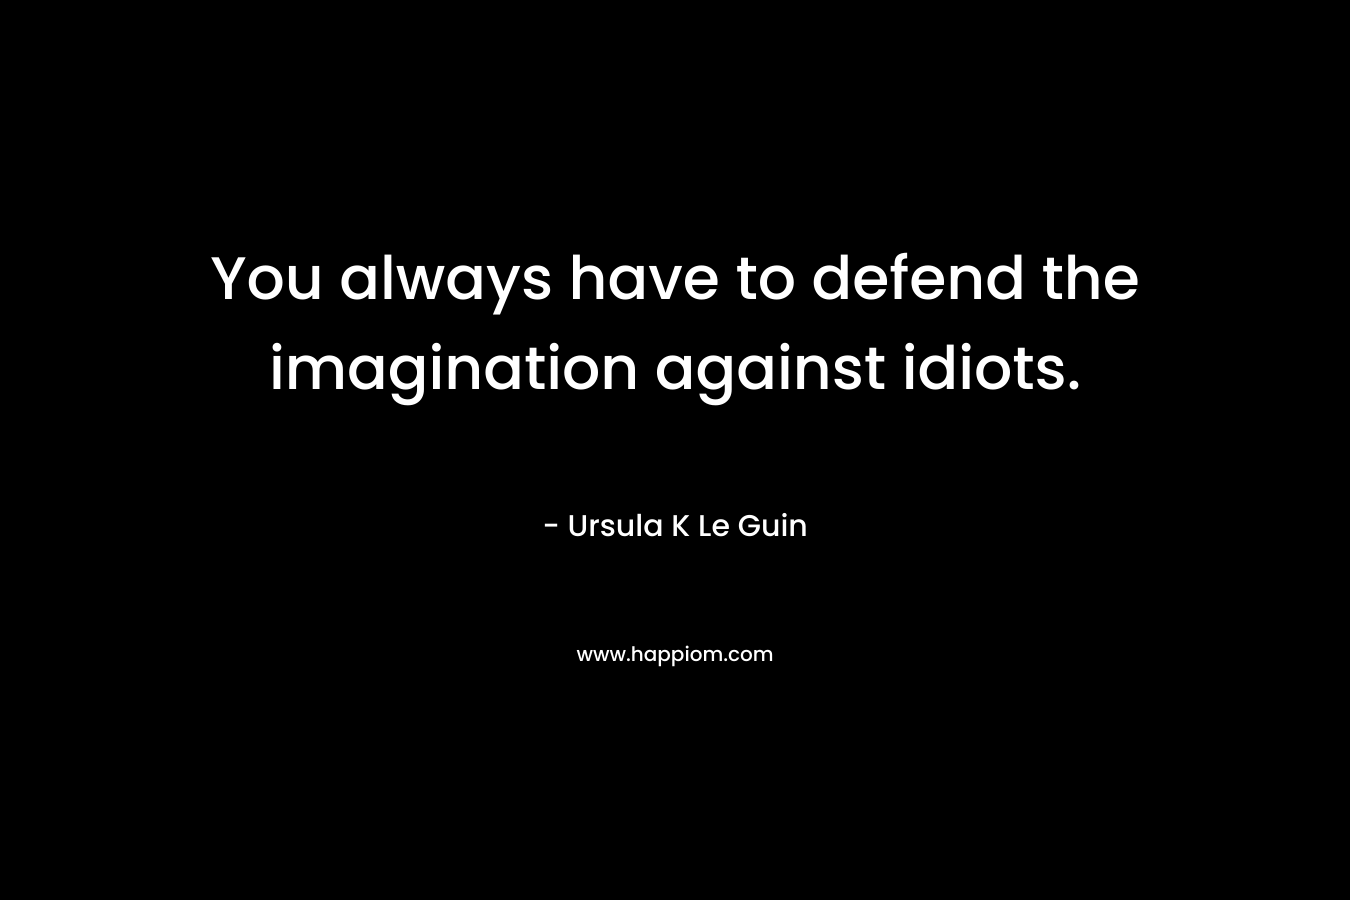 You always have to defend the imagination against idiots.